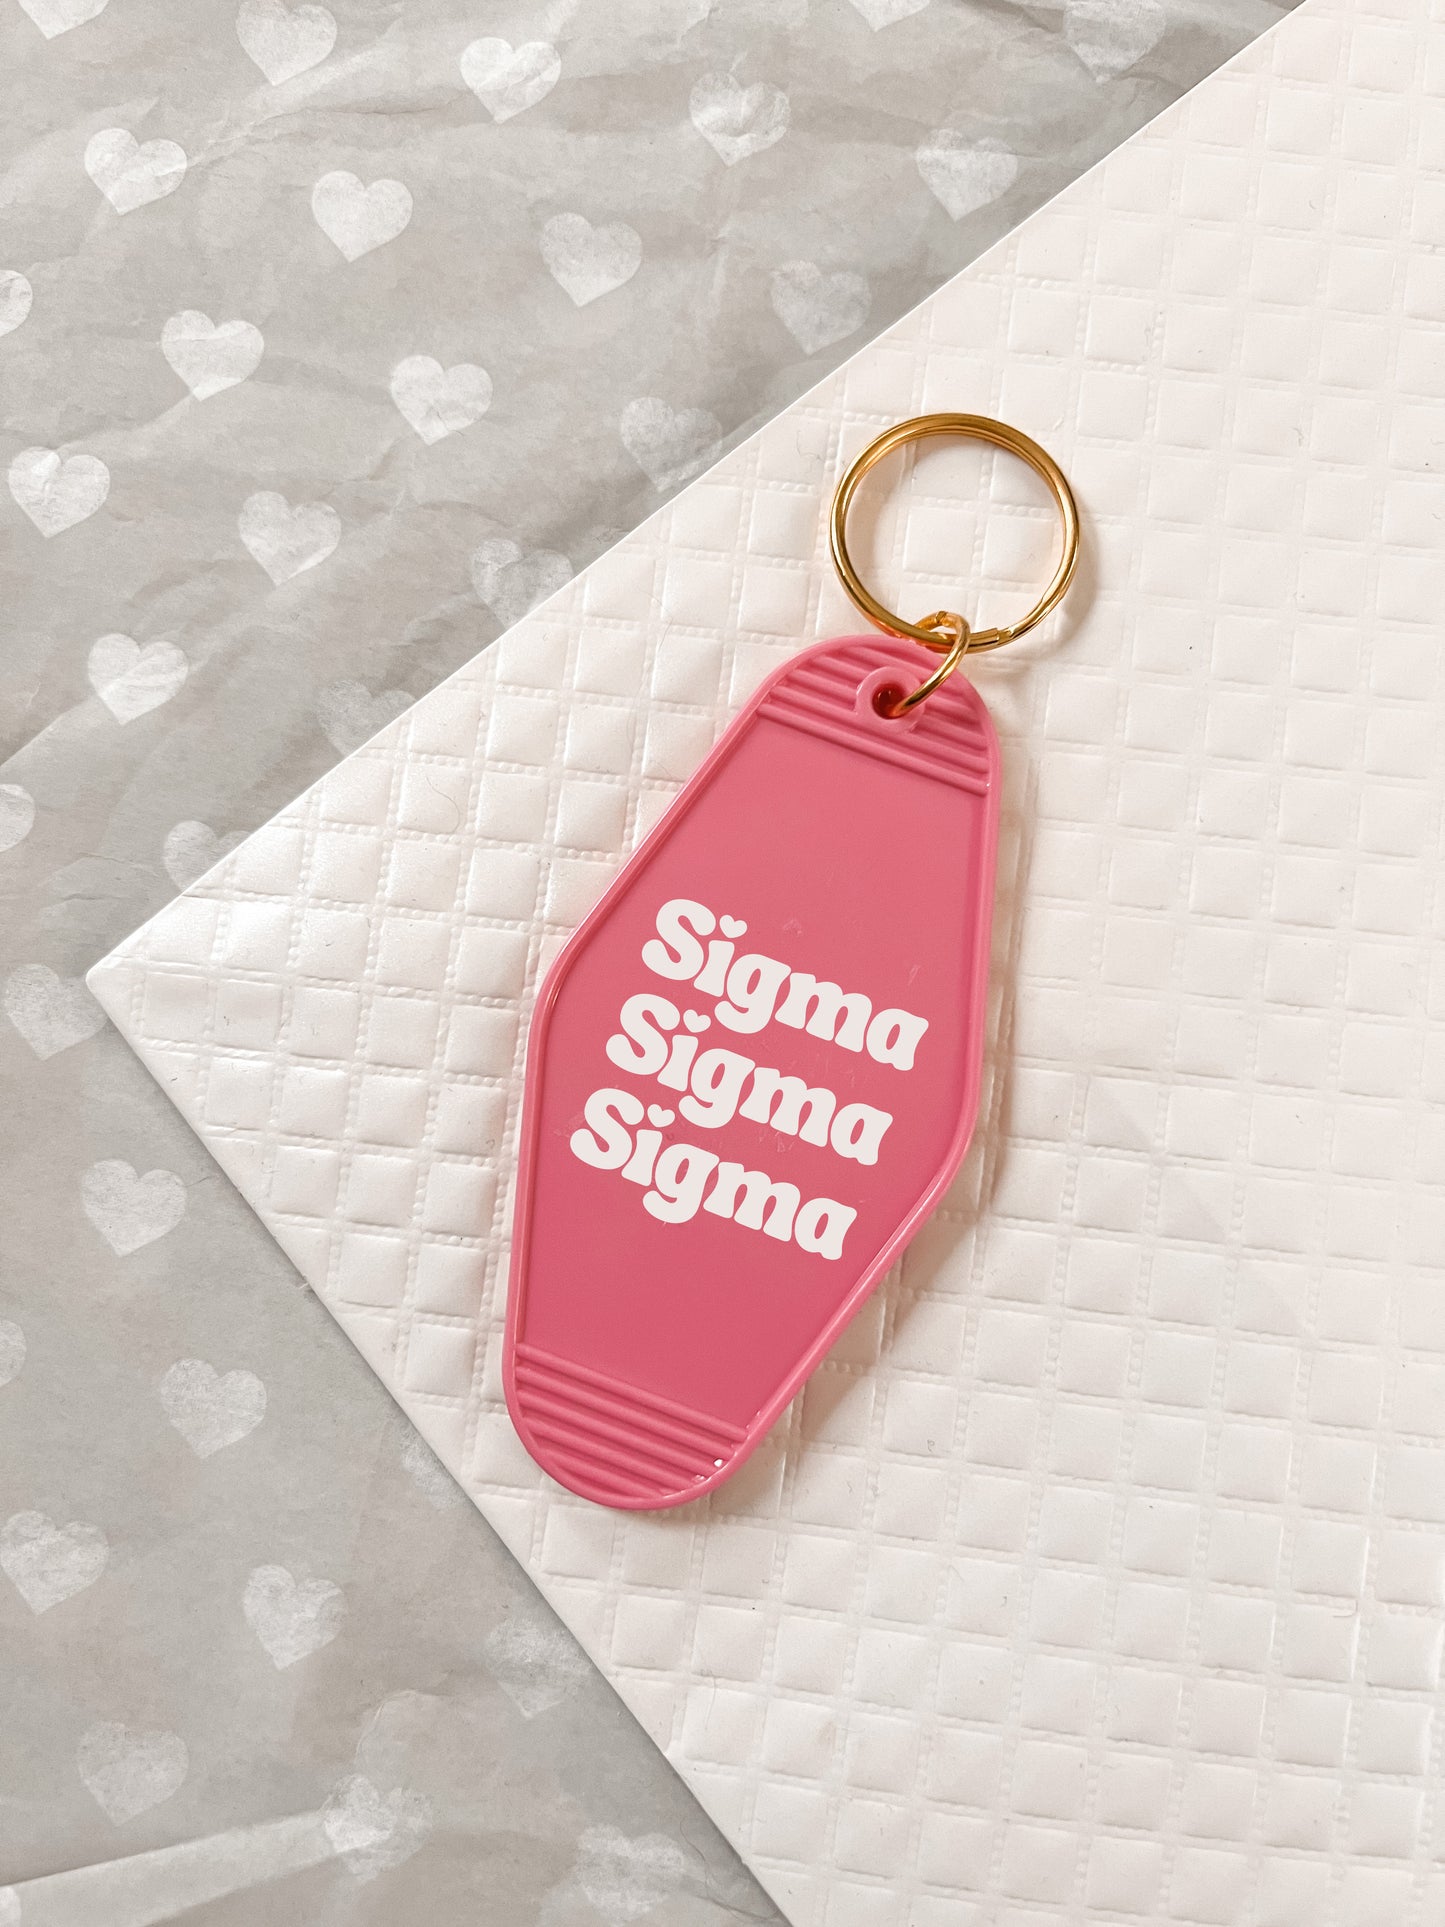 Sigma Sigma Sigma Motel Hotel Key Chain in Hot pink with white letters and gold ring. TriSig TriSigma